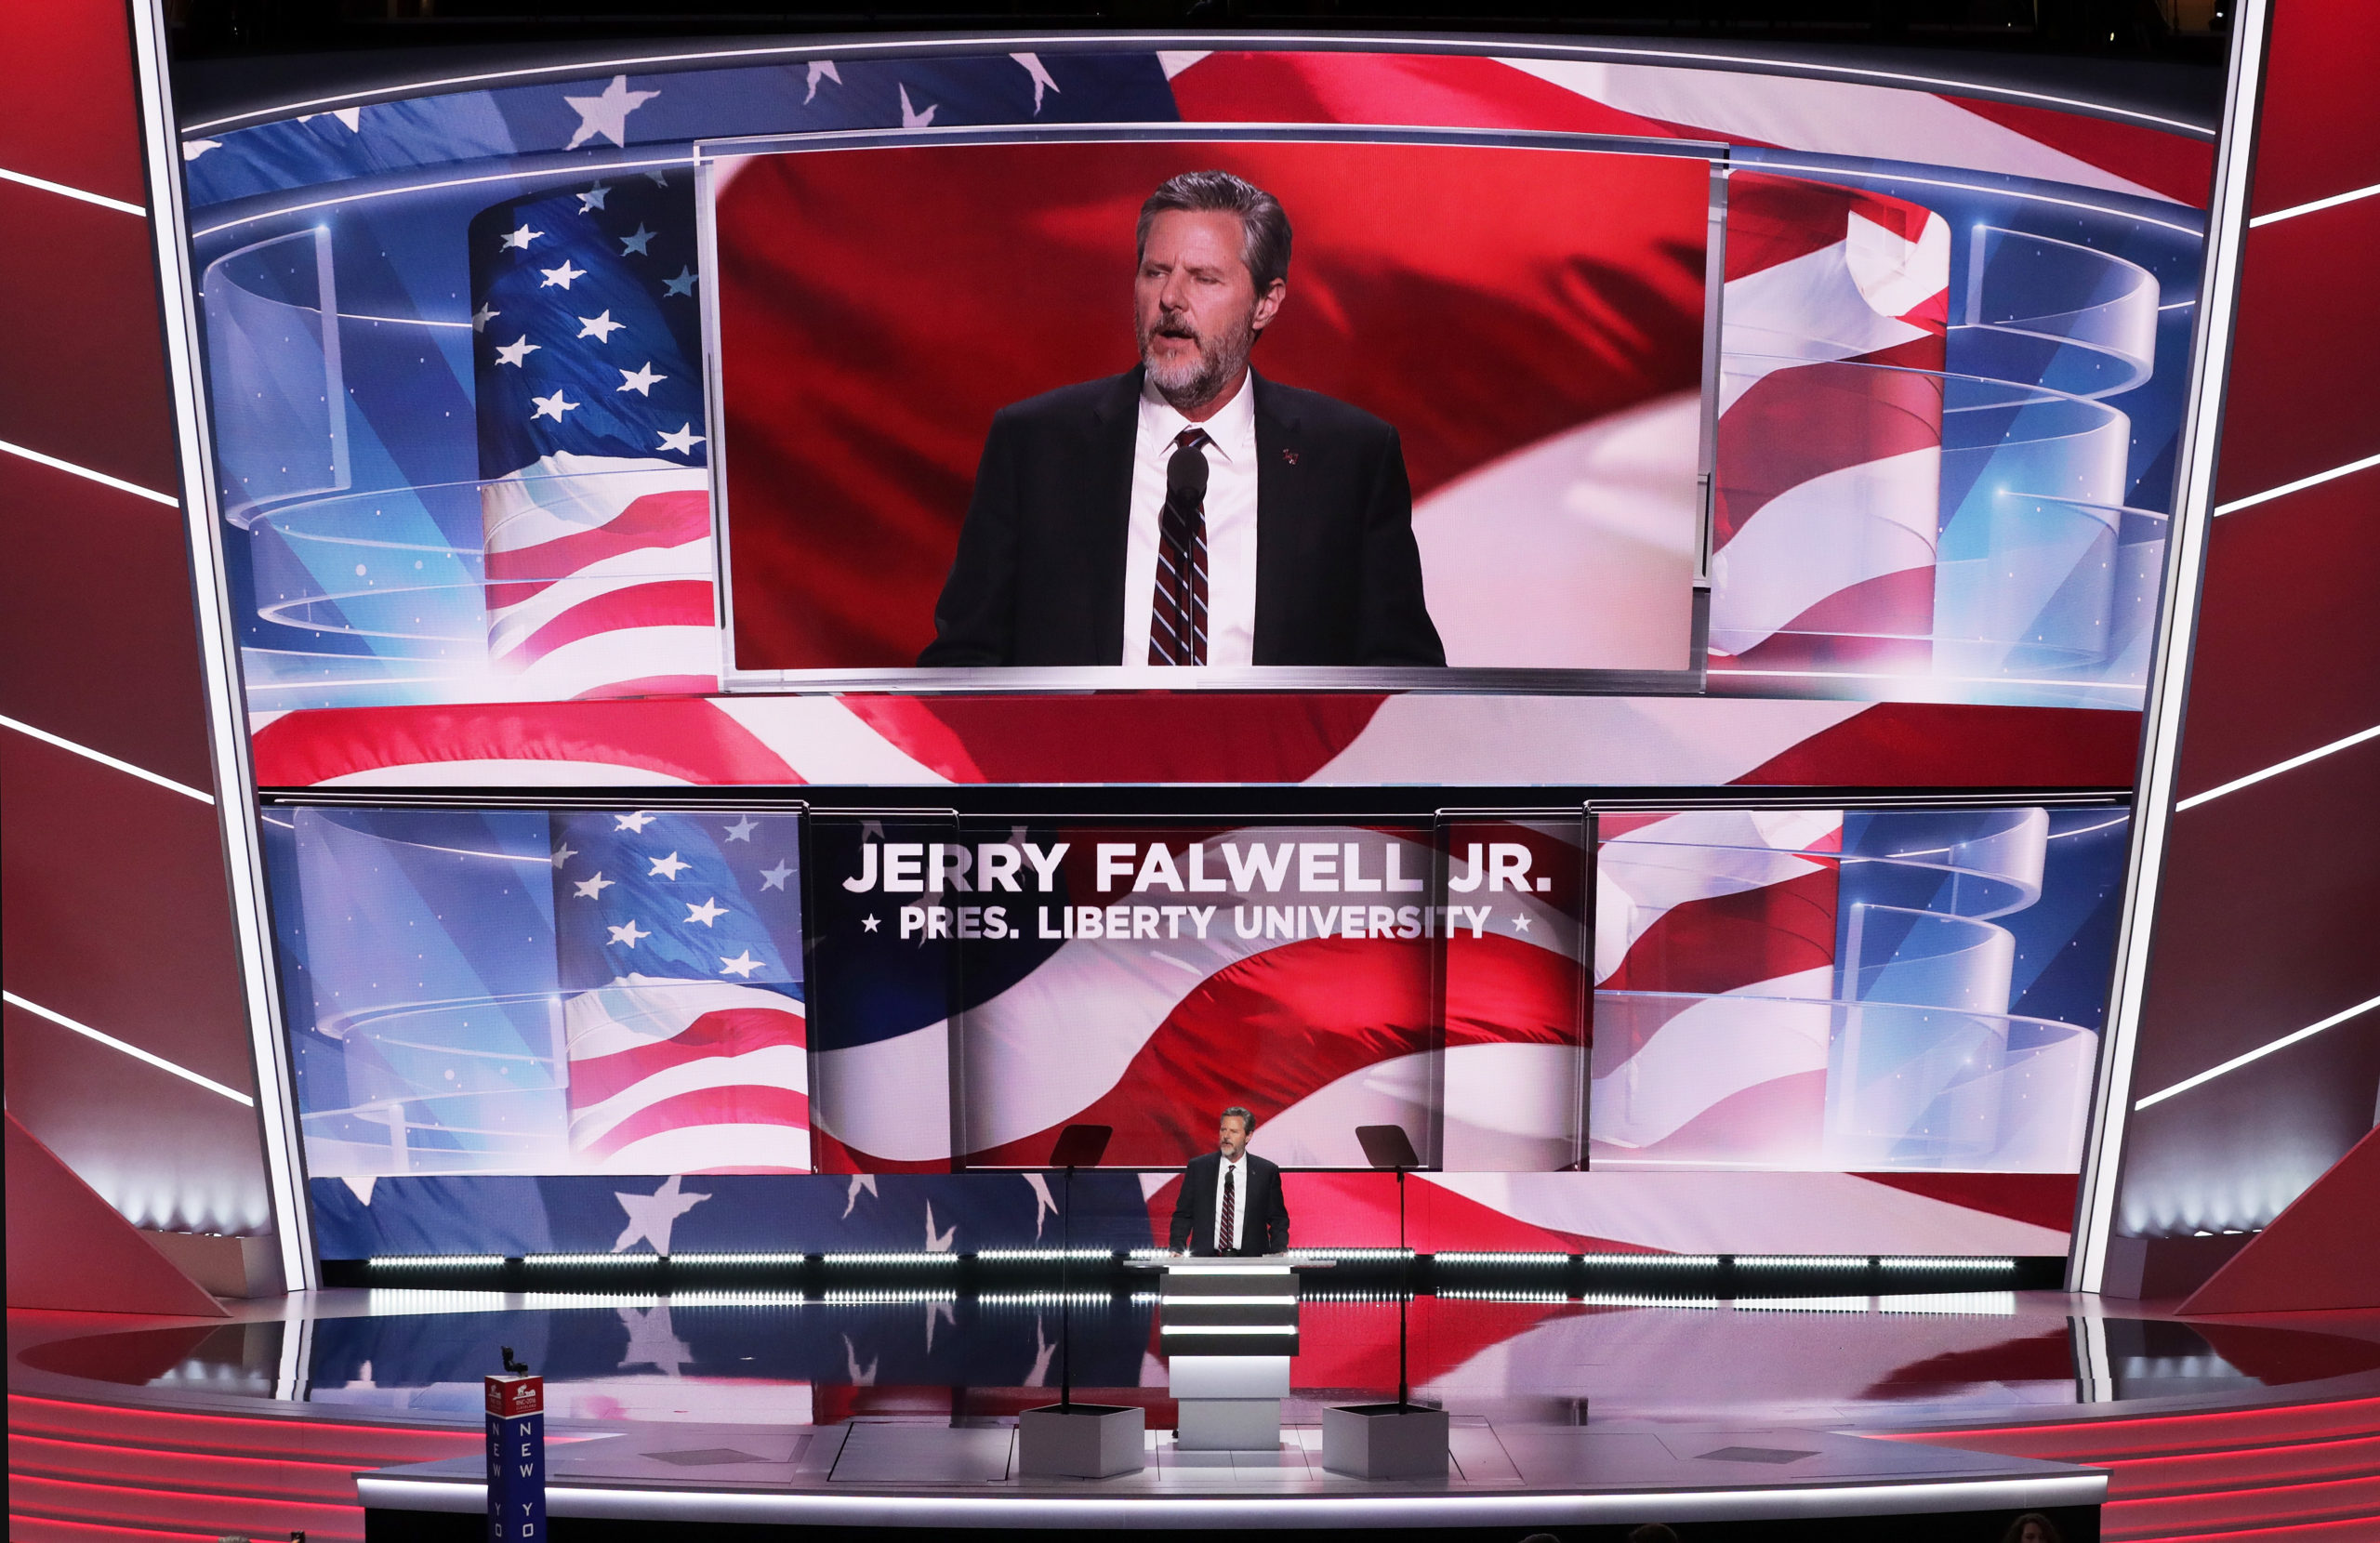 President of Liberty University, Jerry Falwell Jr, delivers a speech during the evening session on the fourth day of the Republican National Convention in 2016 